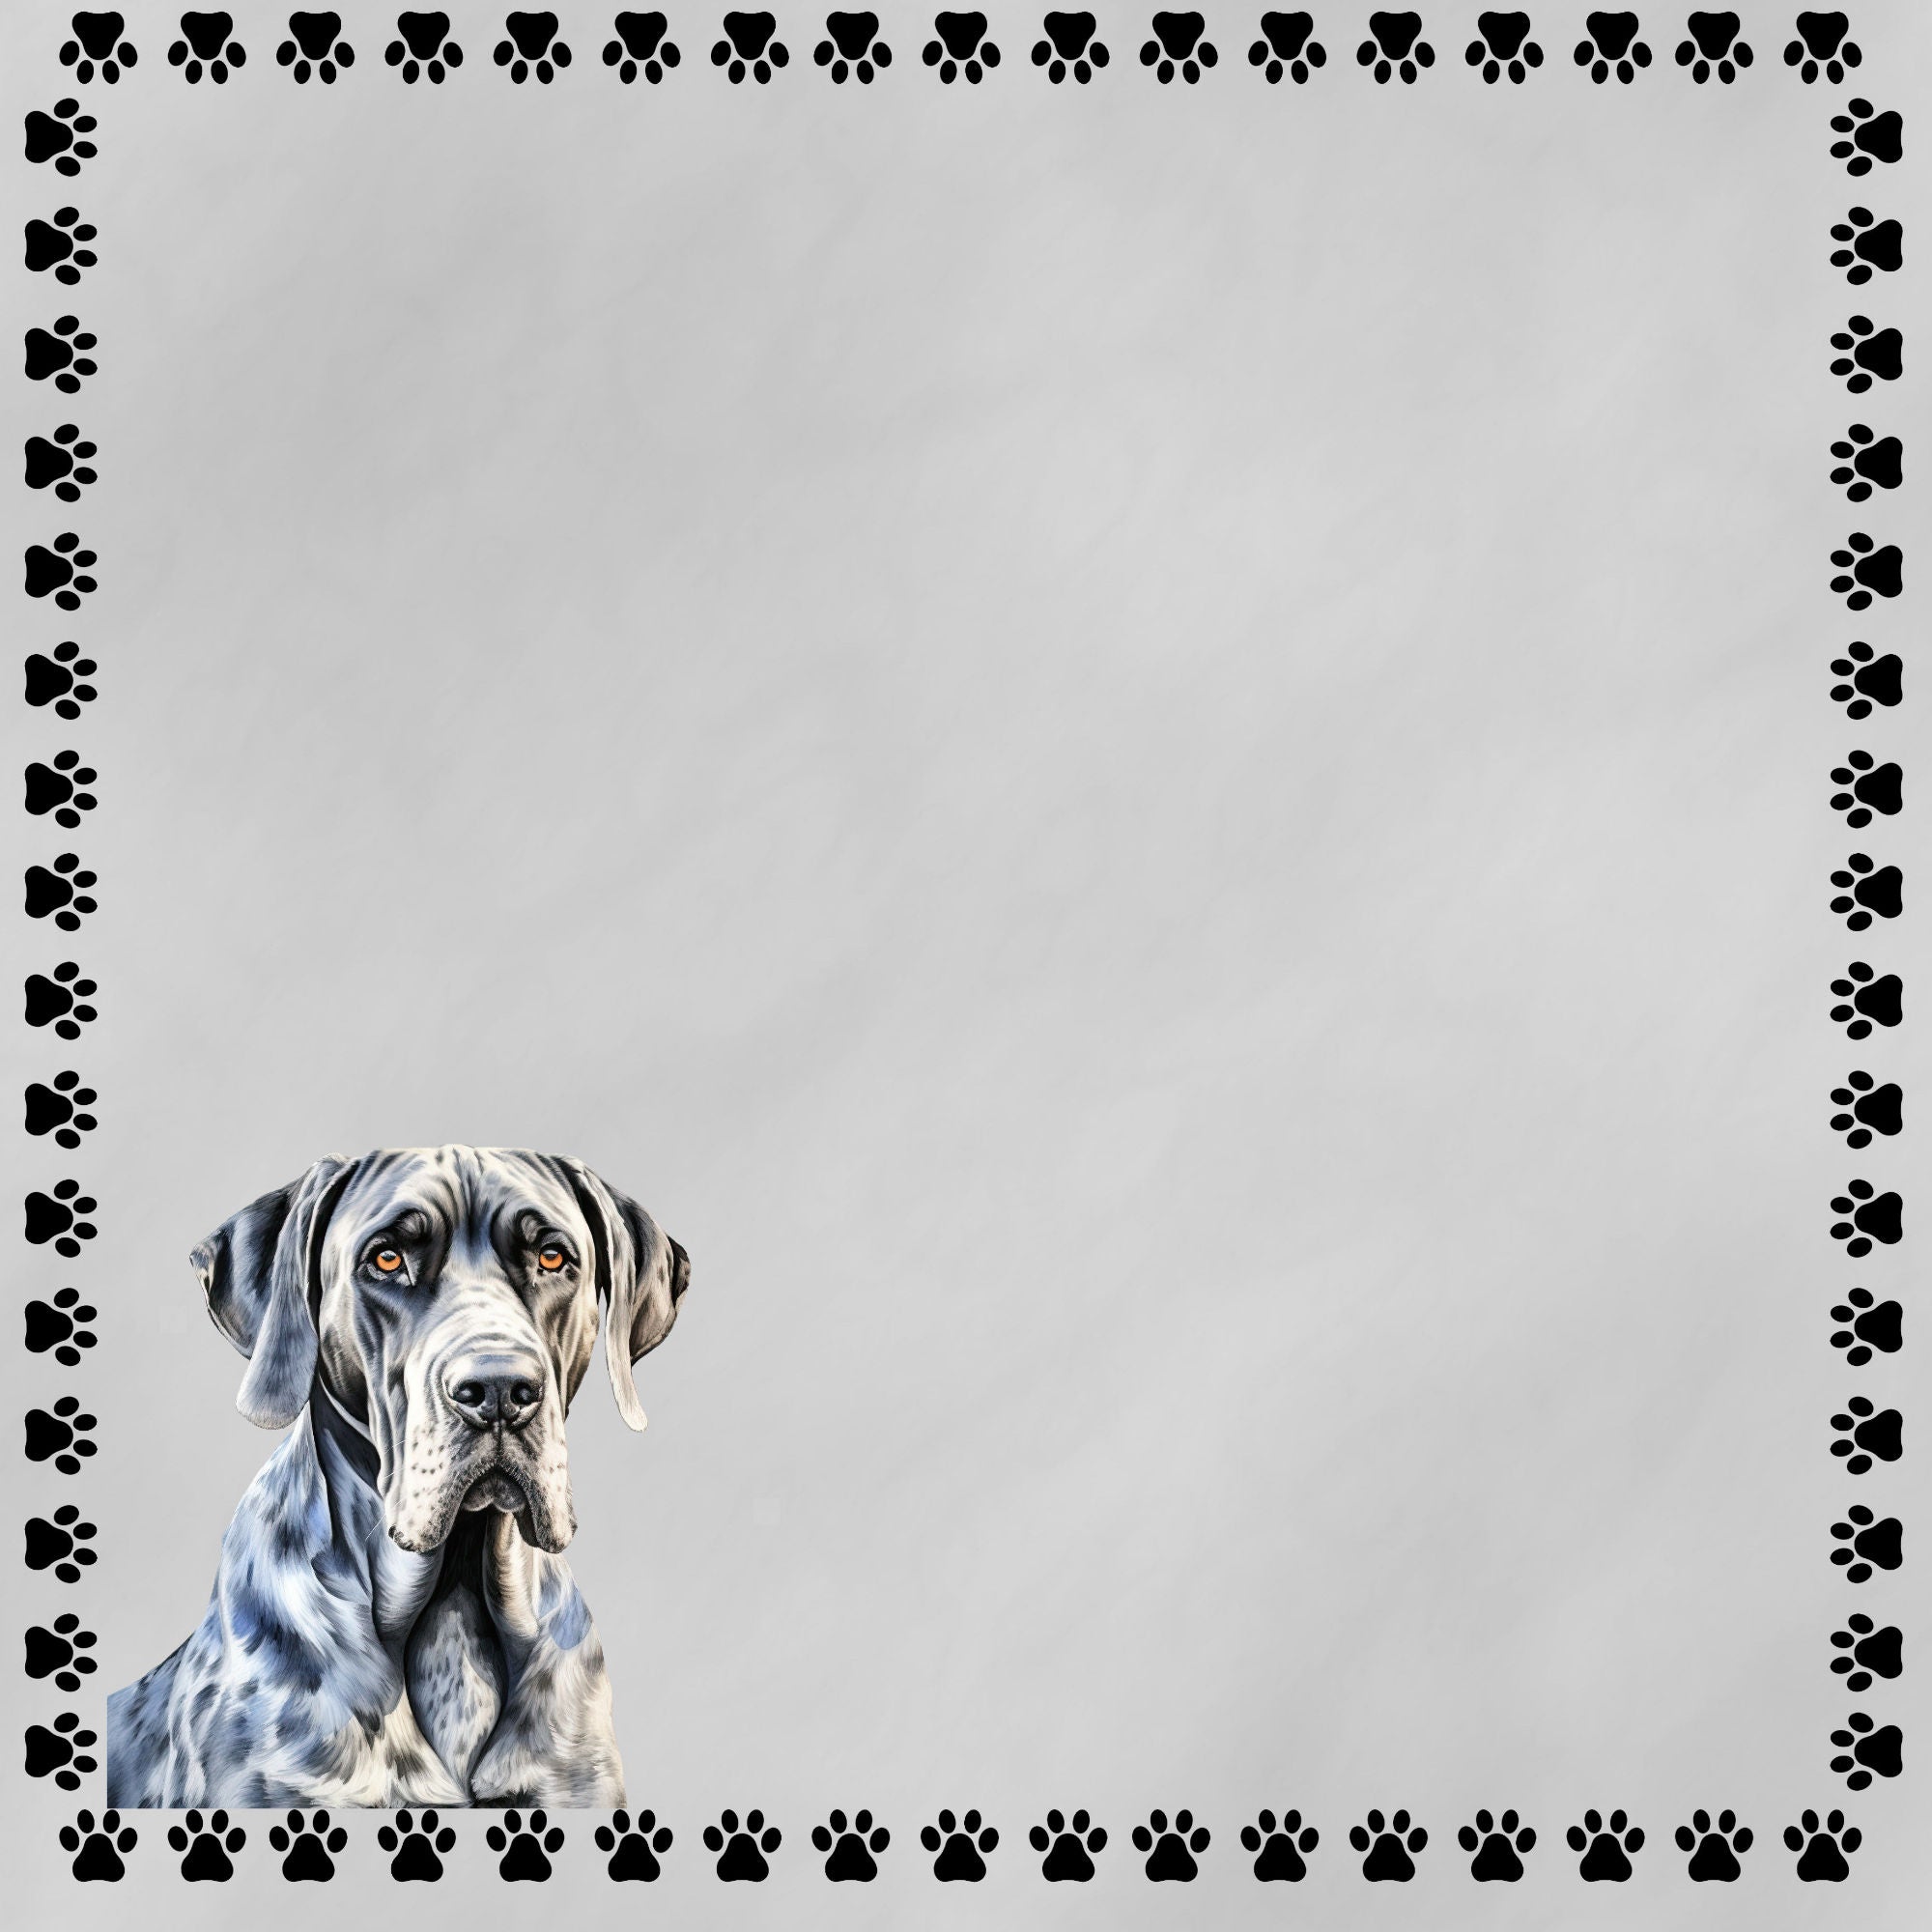 Dog Breeds Collection Great Dane 12 x 12 Double-Sided Scrapbook Paper by SSC Designs